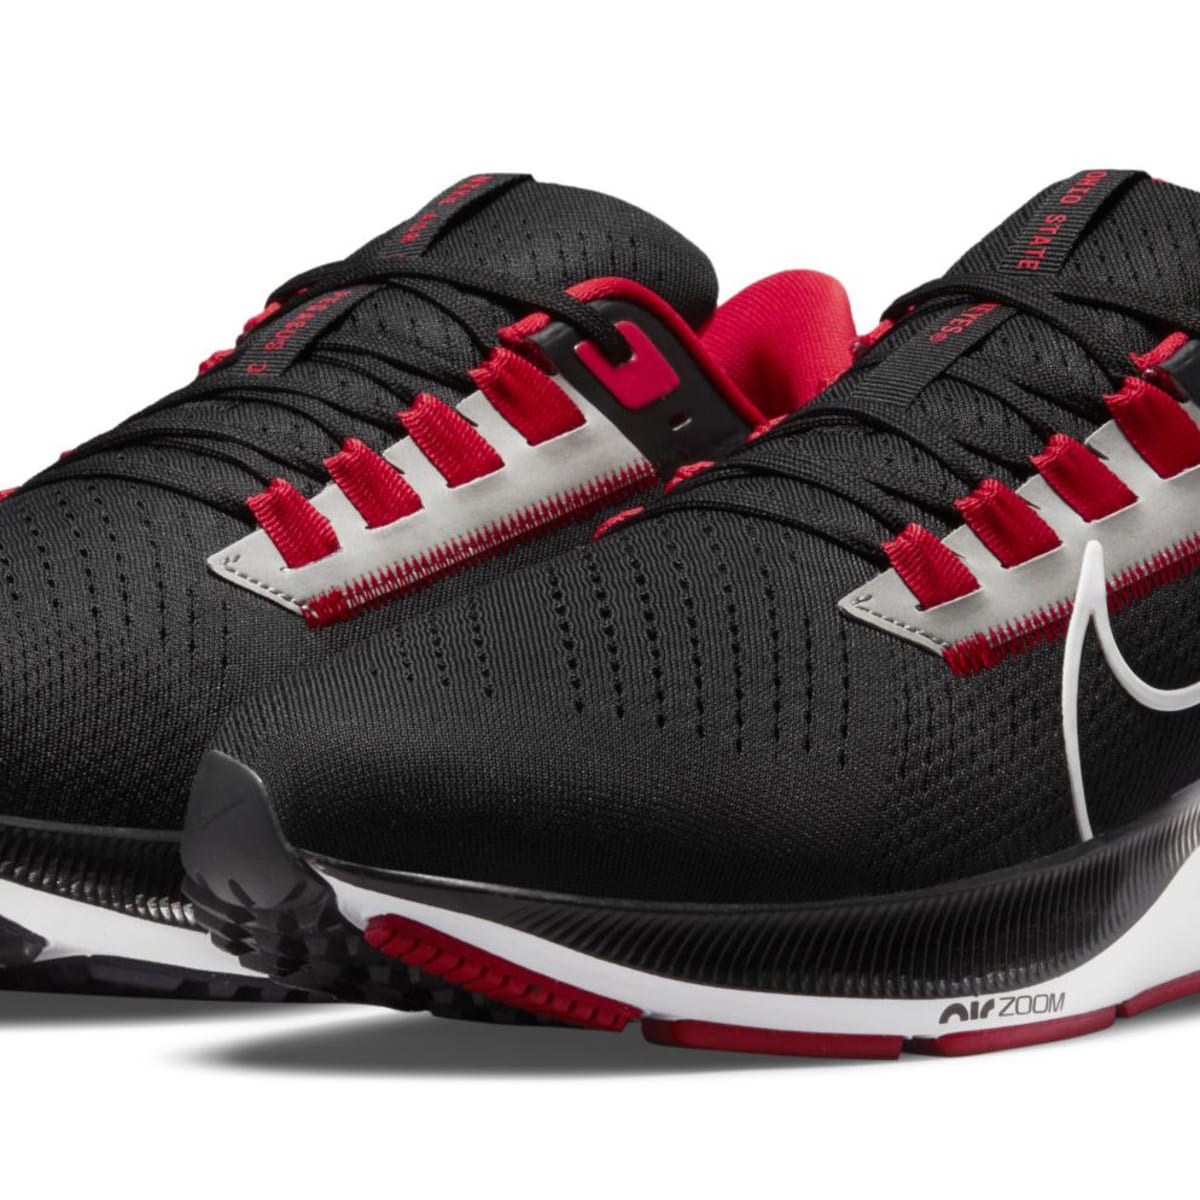 Ohio State To Release Nike Pegasus 38 Shoes This Summer - Sports Illustrated Ohio State Buckeyes News, More